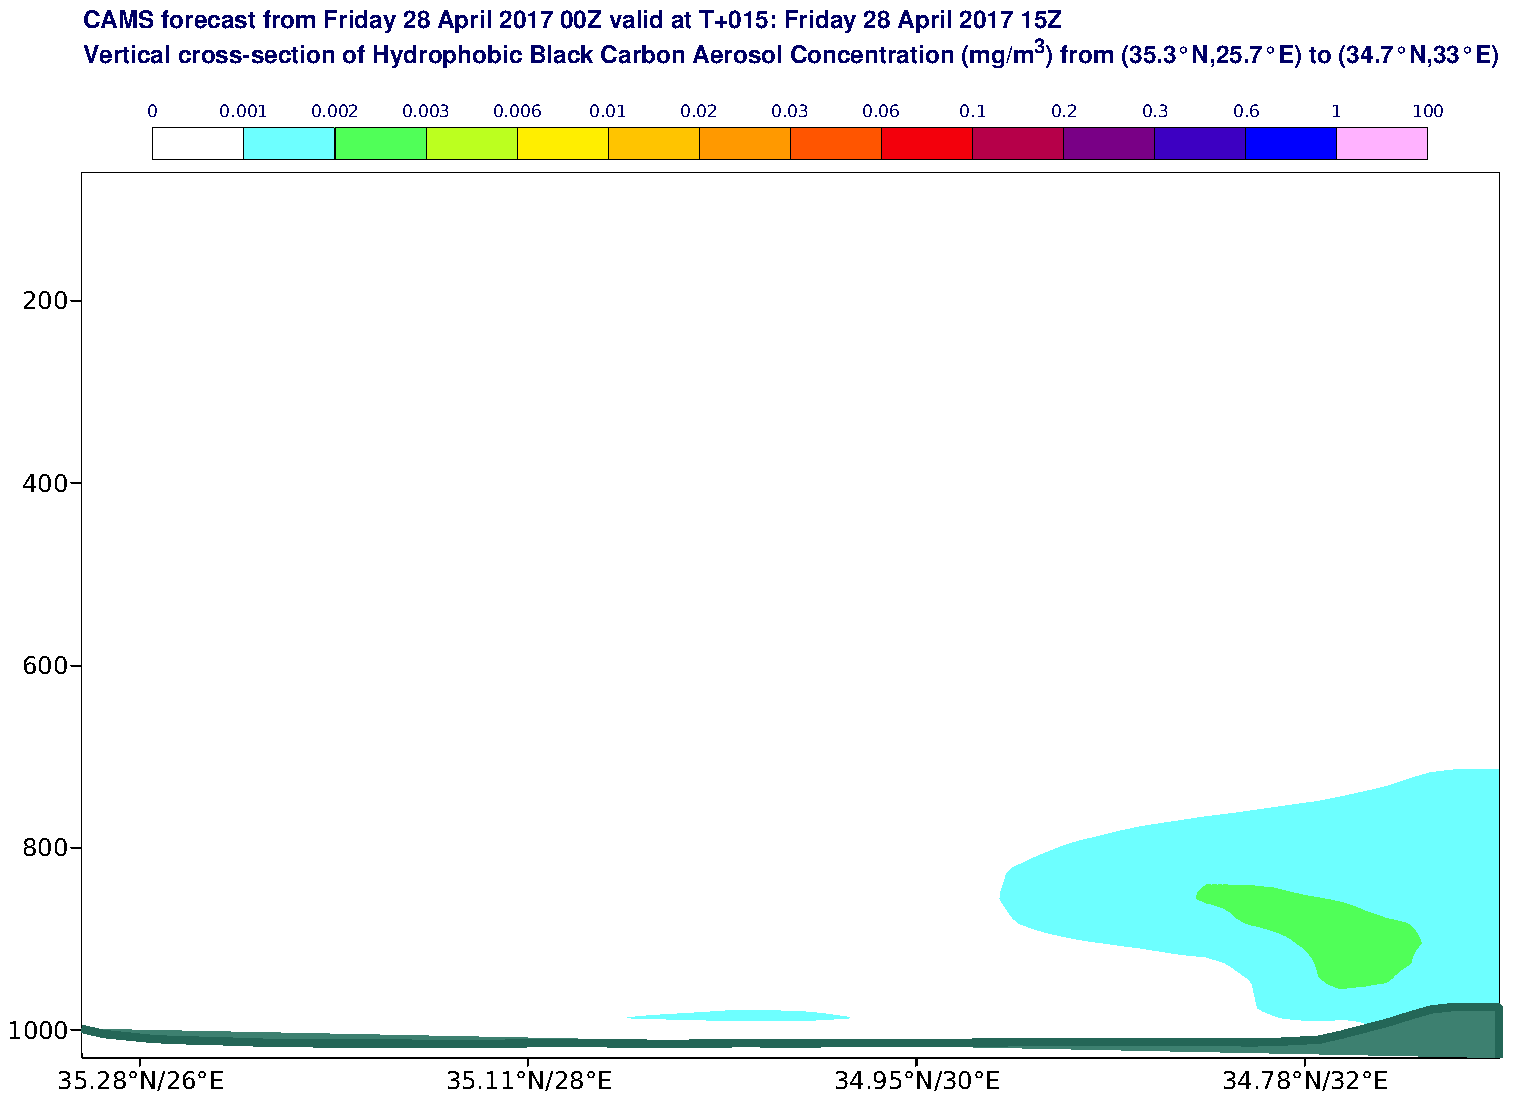 Vertical cross-section of Hydrophobic Black Carbon Aerosol Concentration (mg/m3) valid at T15 - 2017-04-28 15:00